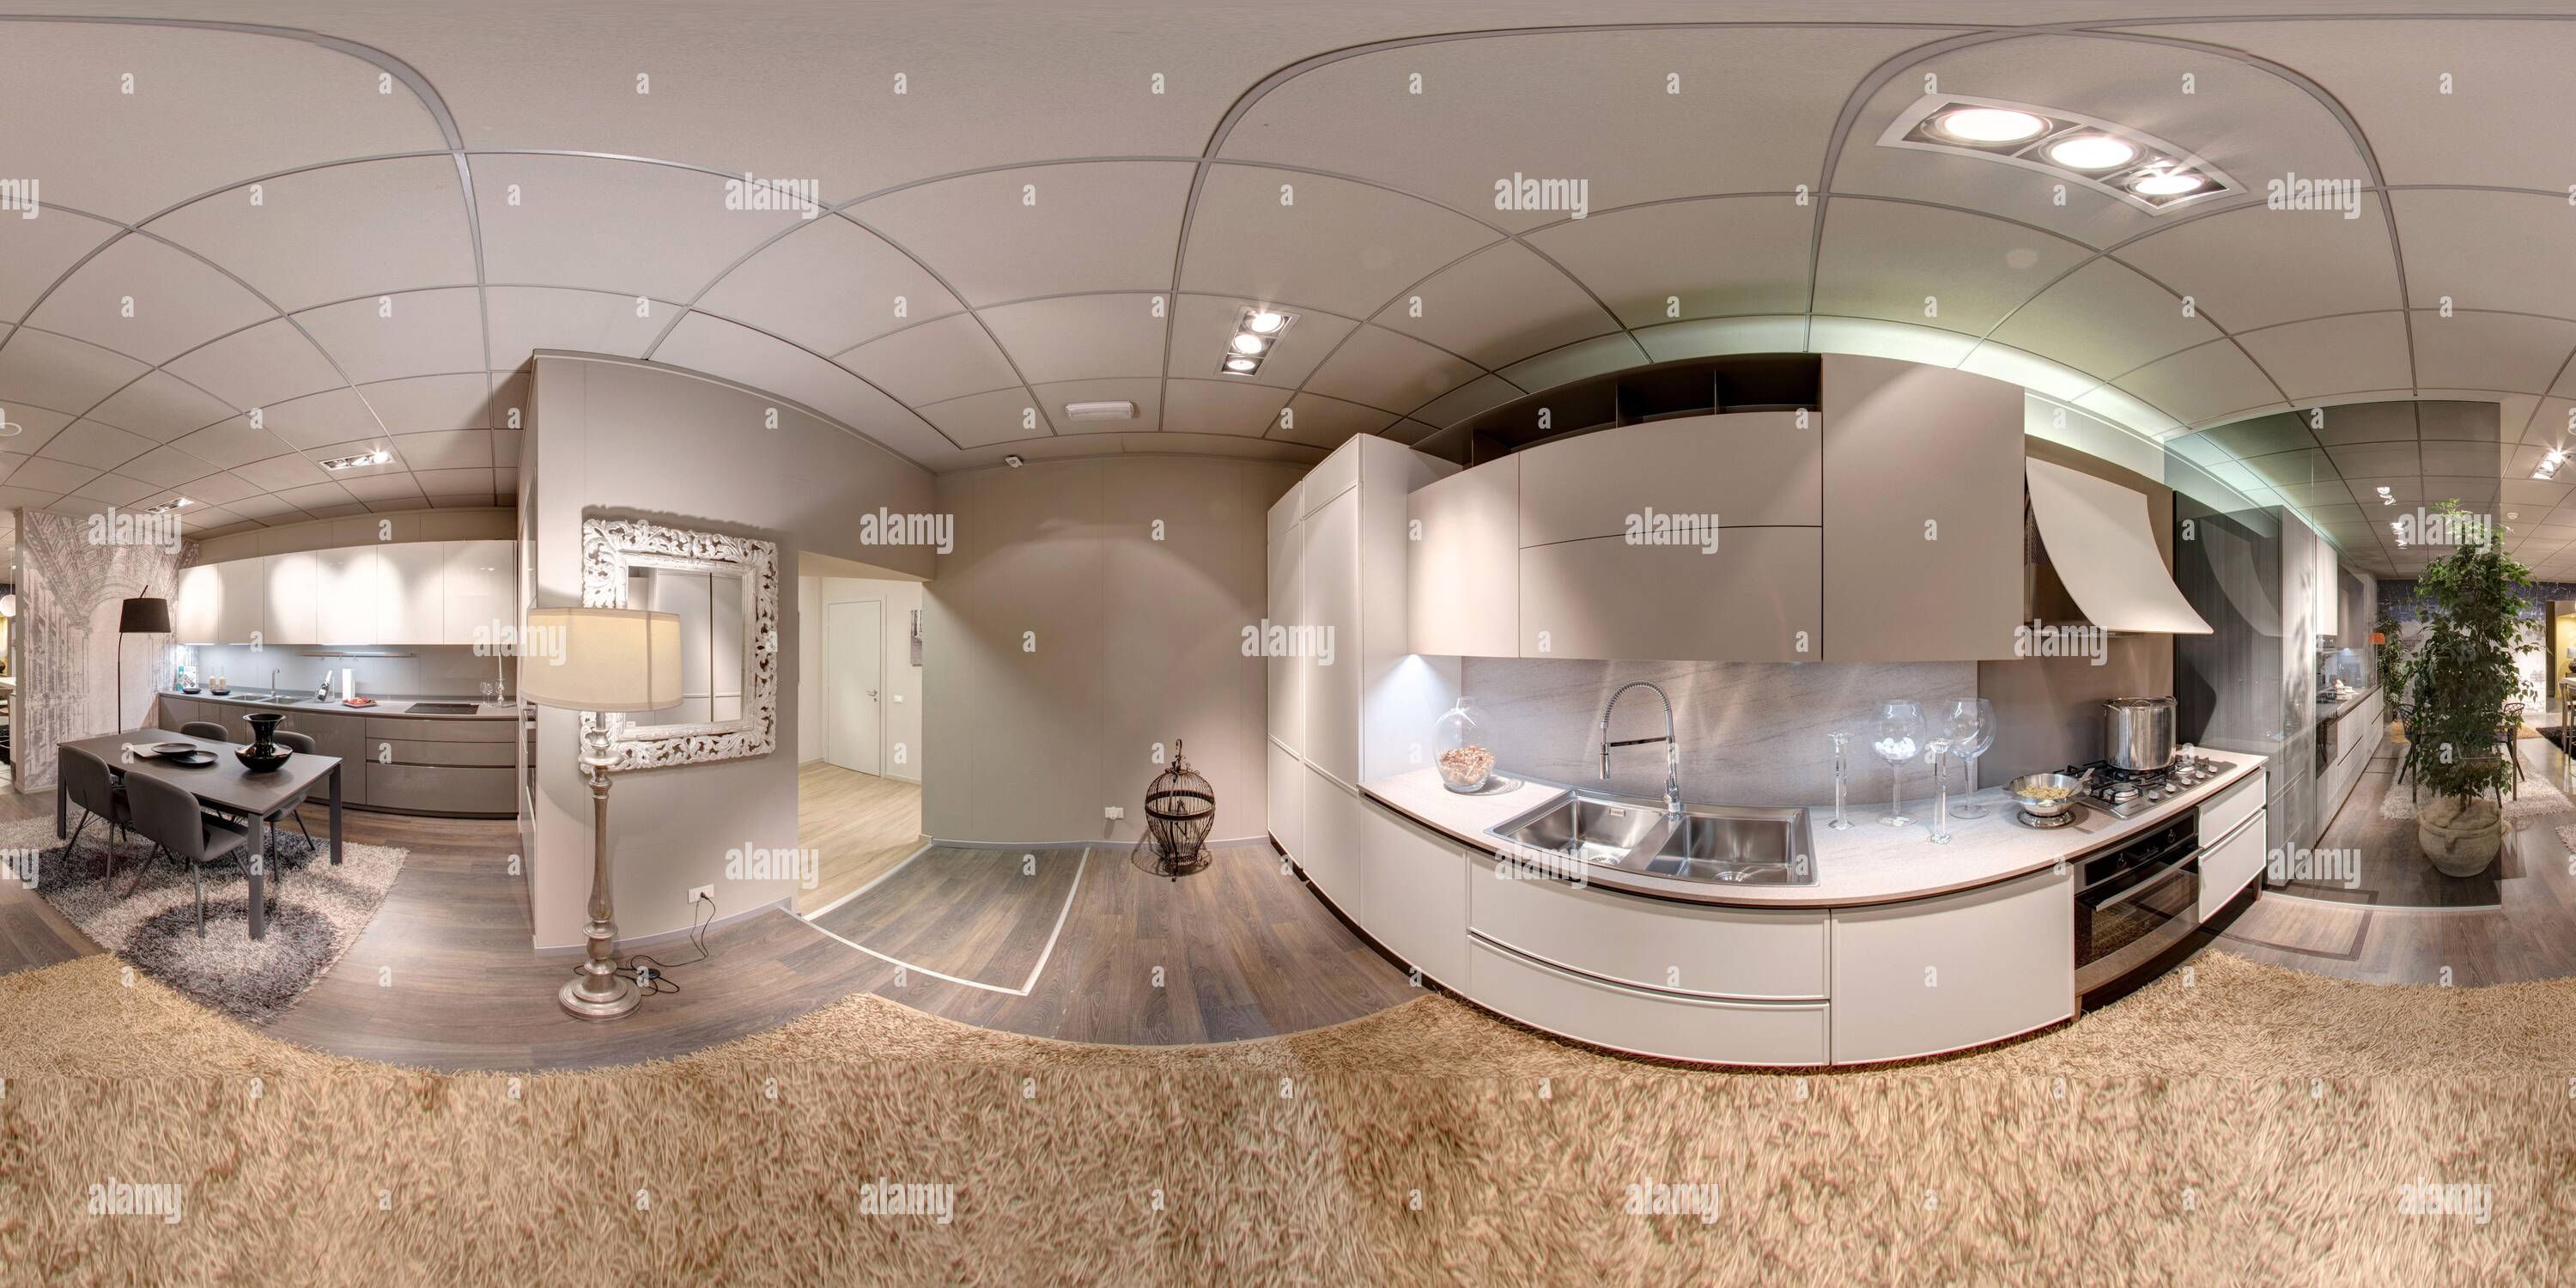 360 degree panoramic view of 360 degree panorama of a kitchen showroom with modern built-in appliances and white cabinets on display in a furniture store